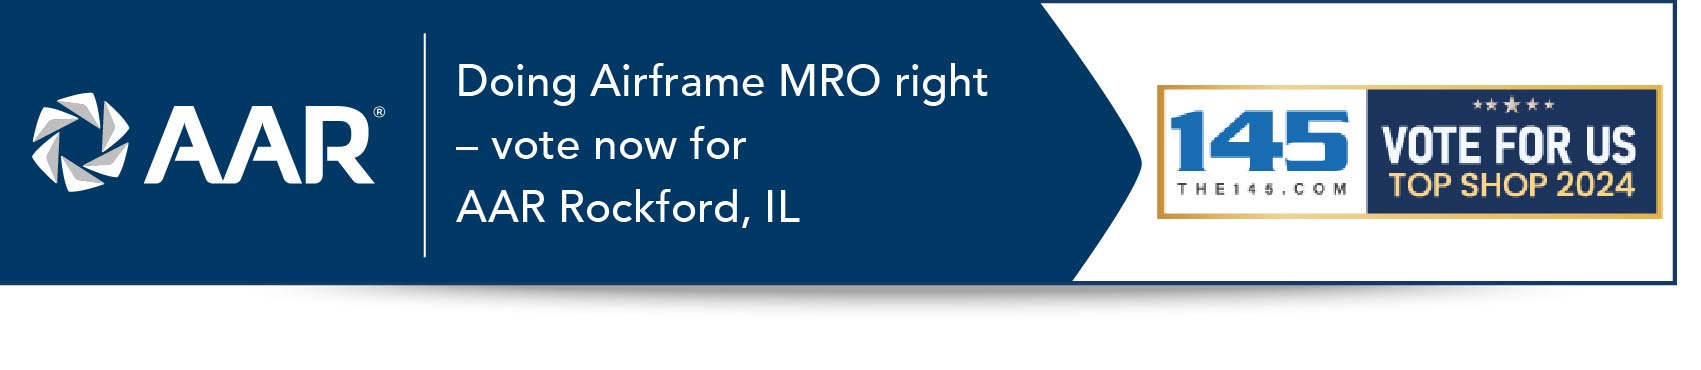 Vote for MRO Services - Rockford as Your Top Shop